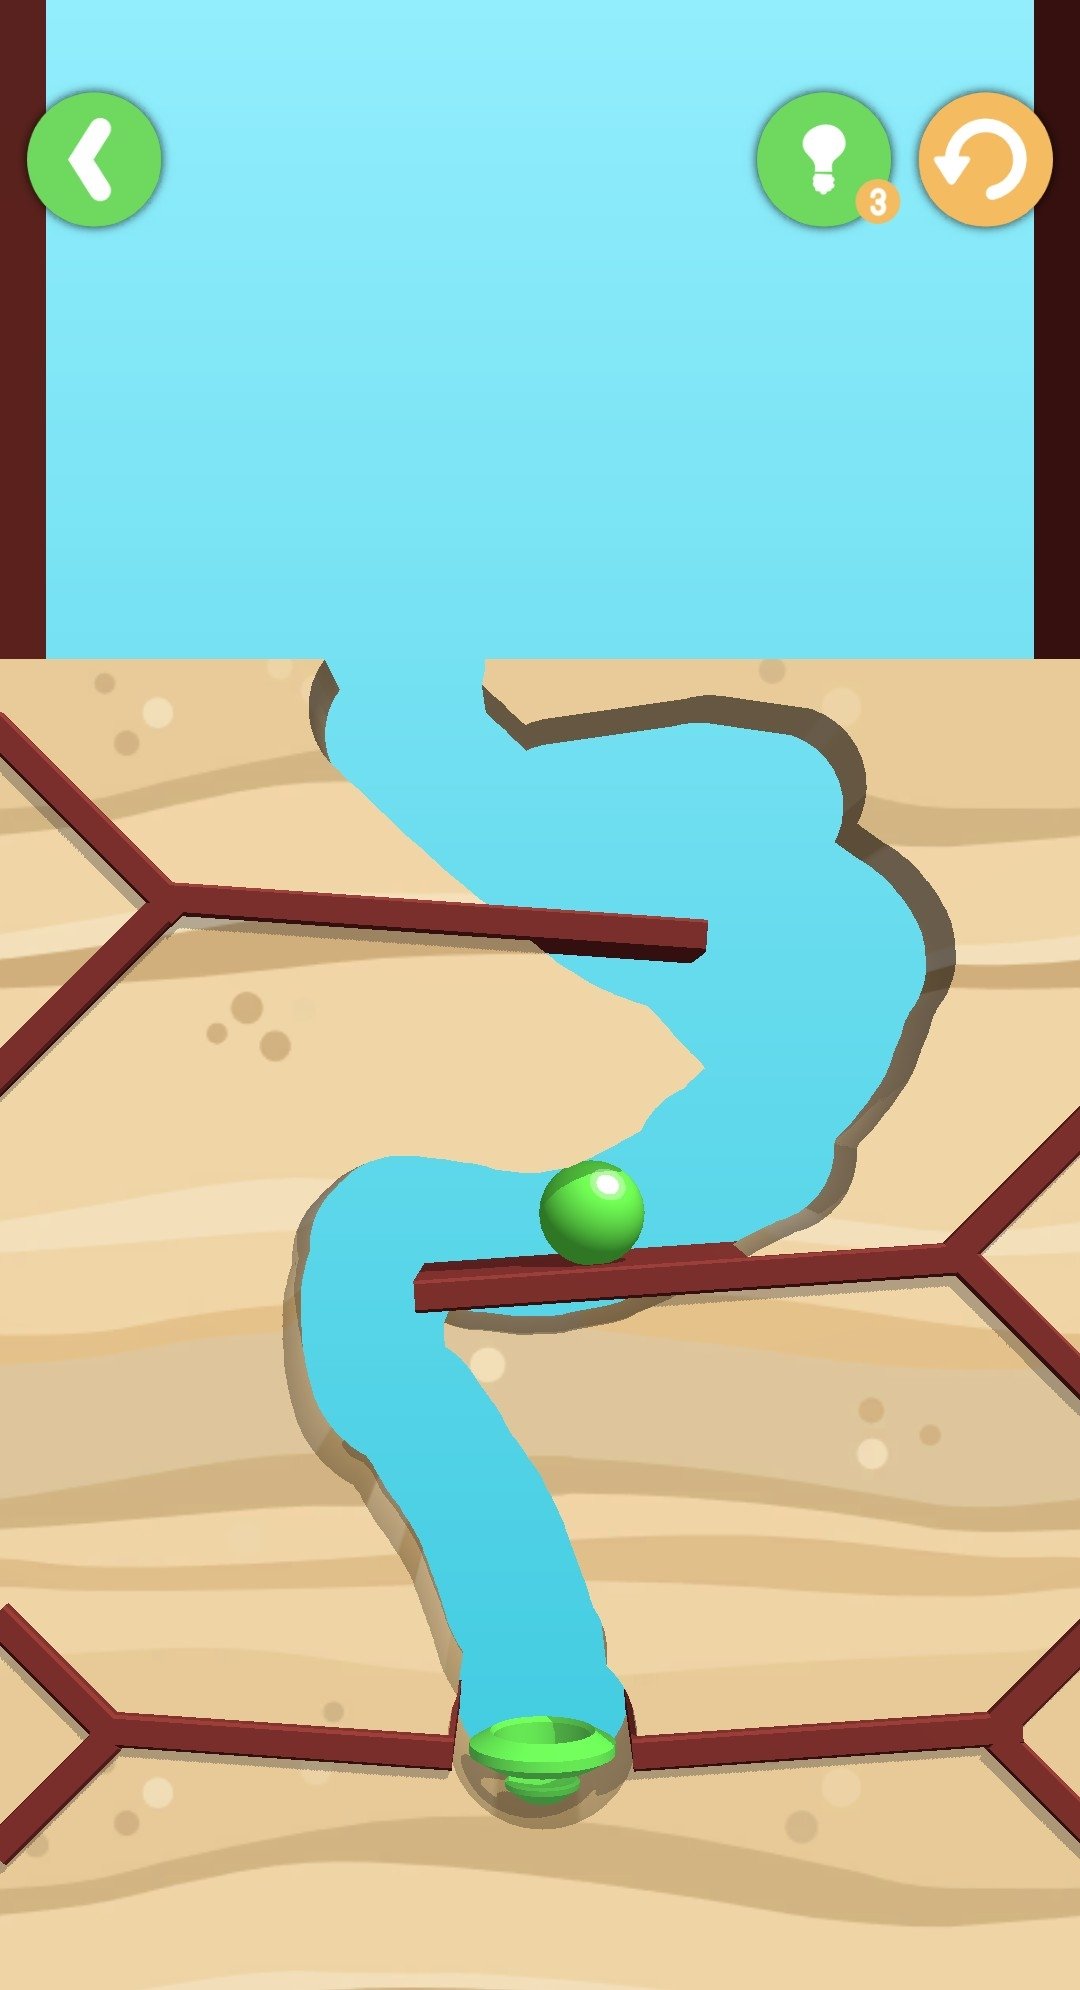 Dig This! APK Download for Android Free